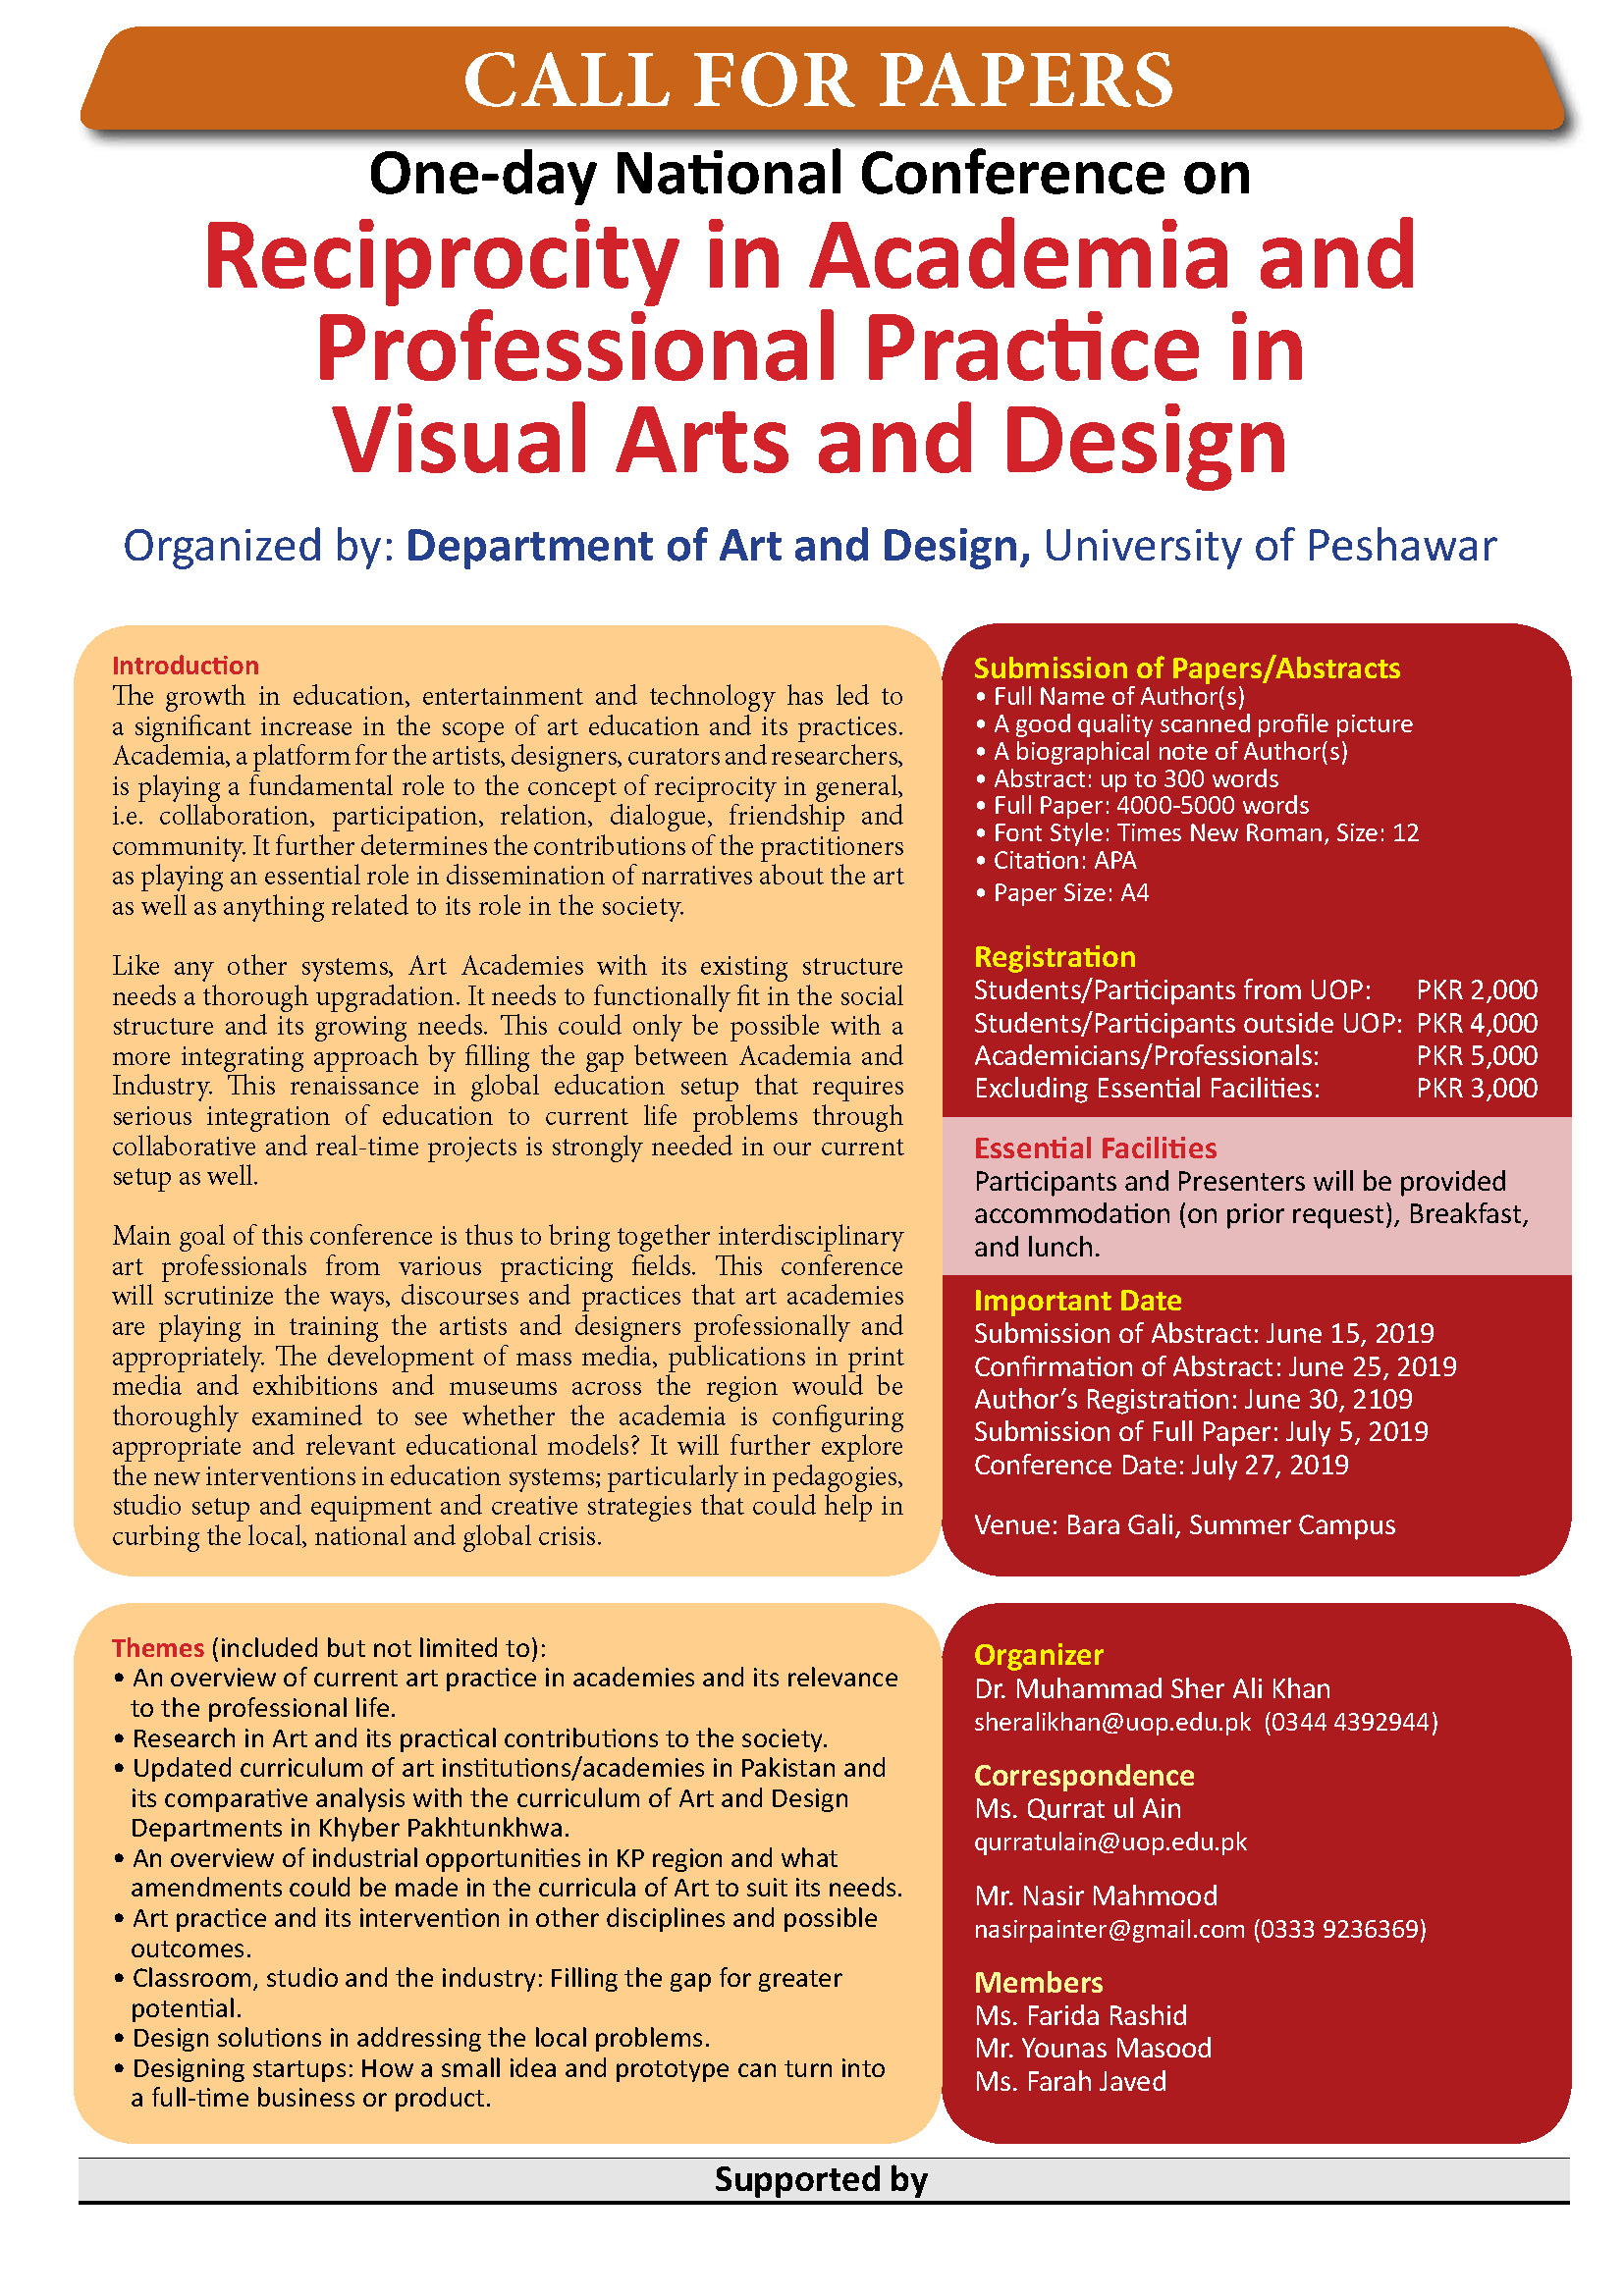 Call for Paper: One-day National Conference on Reciprocity in  Academia and Professional Practice in Visual Arts and Design